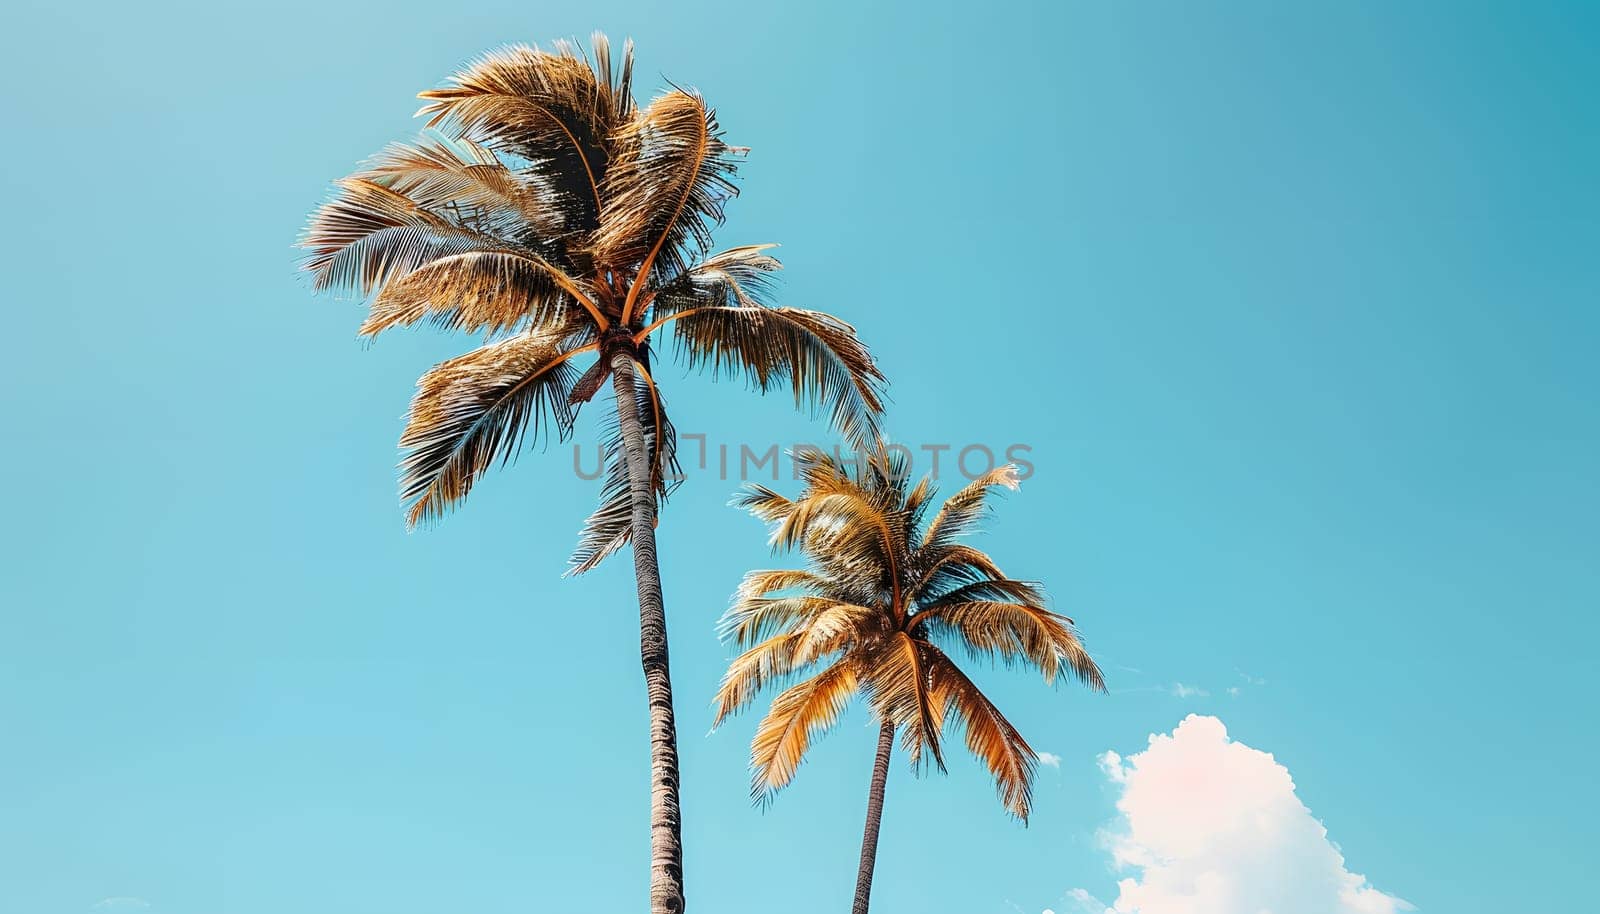 Pair of palm trees under a cloudy blue sky, creating a picturesque landscape by Nadtochiy